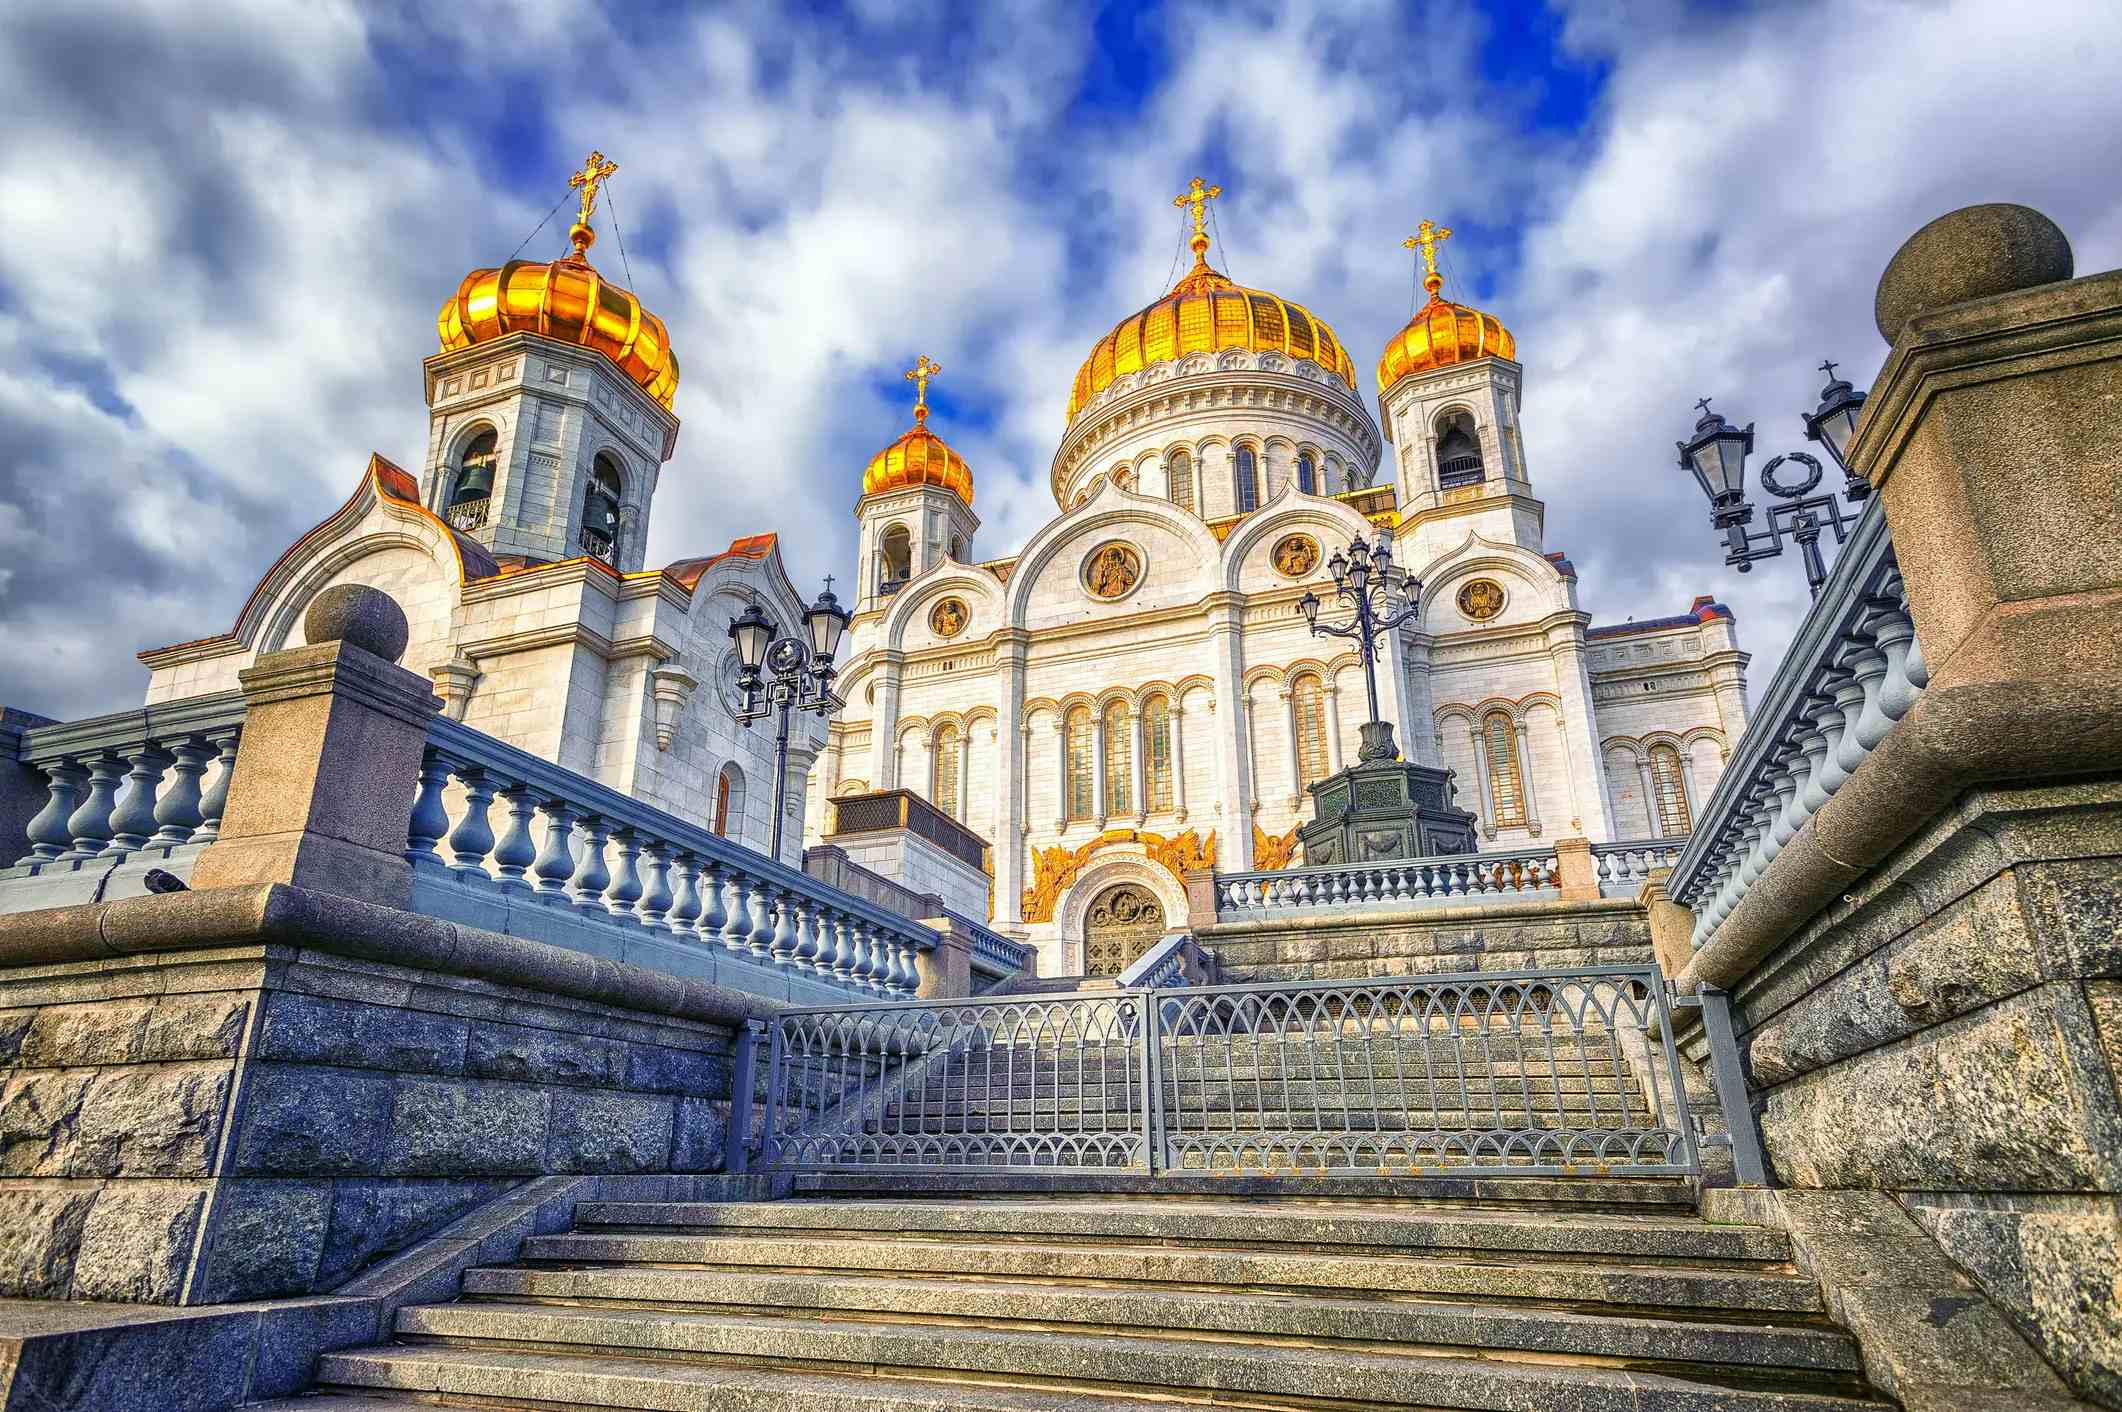 Cathedral of Christ the Saviour image